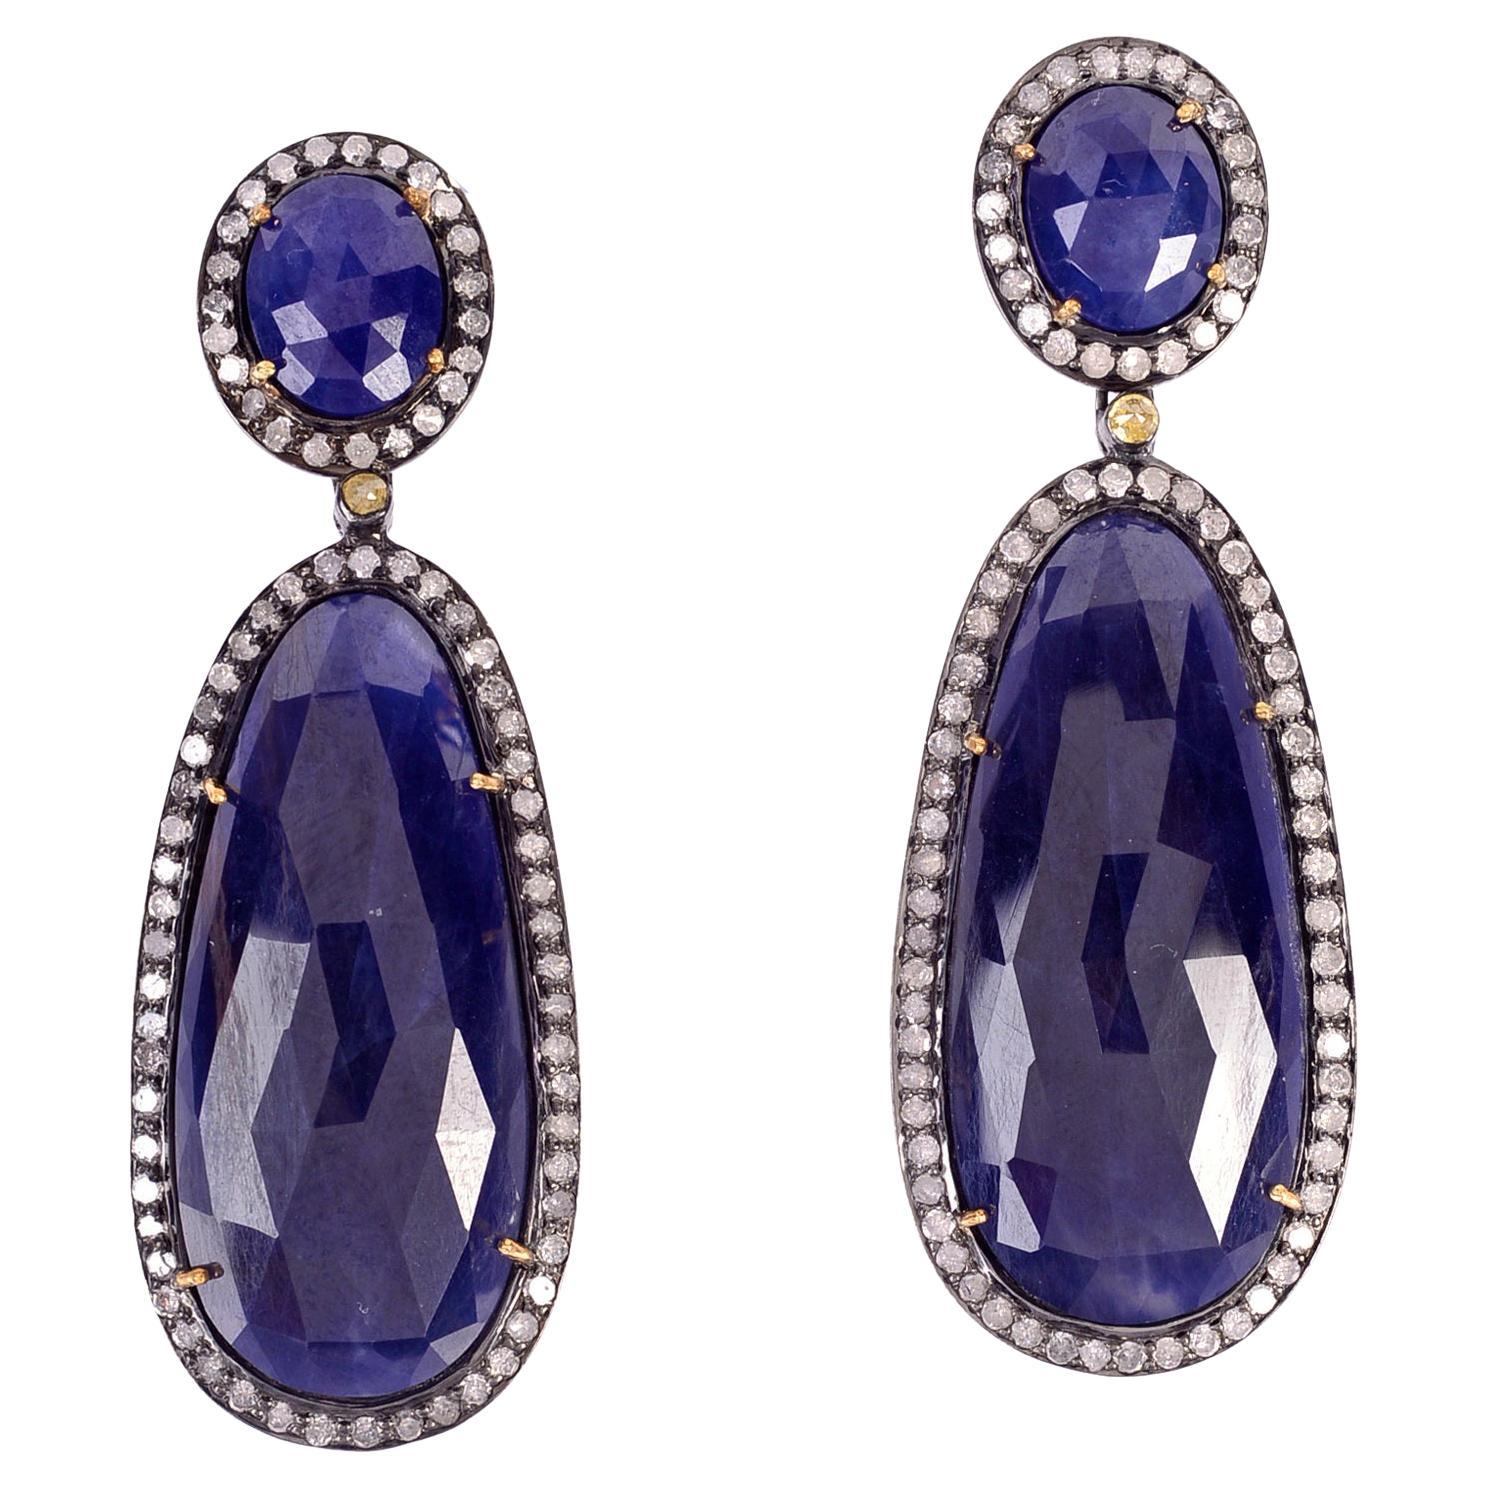 Oval & Drop Shaped Sapphire Earrings with Pave Diamonds in 18k Gold & Silver